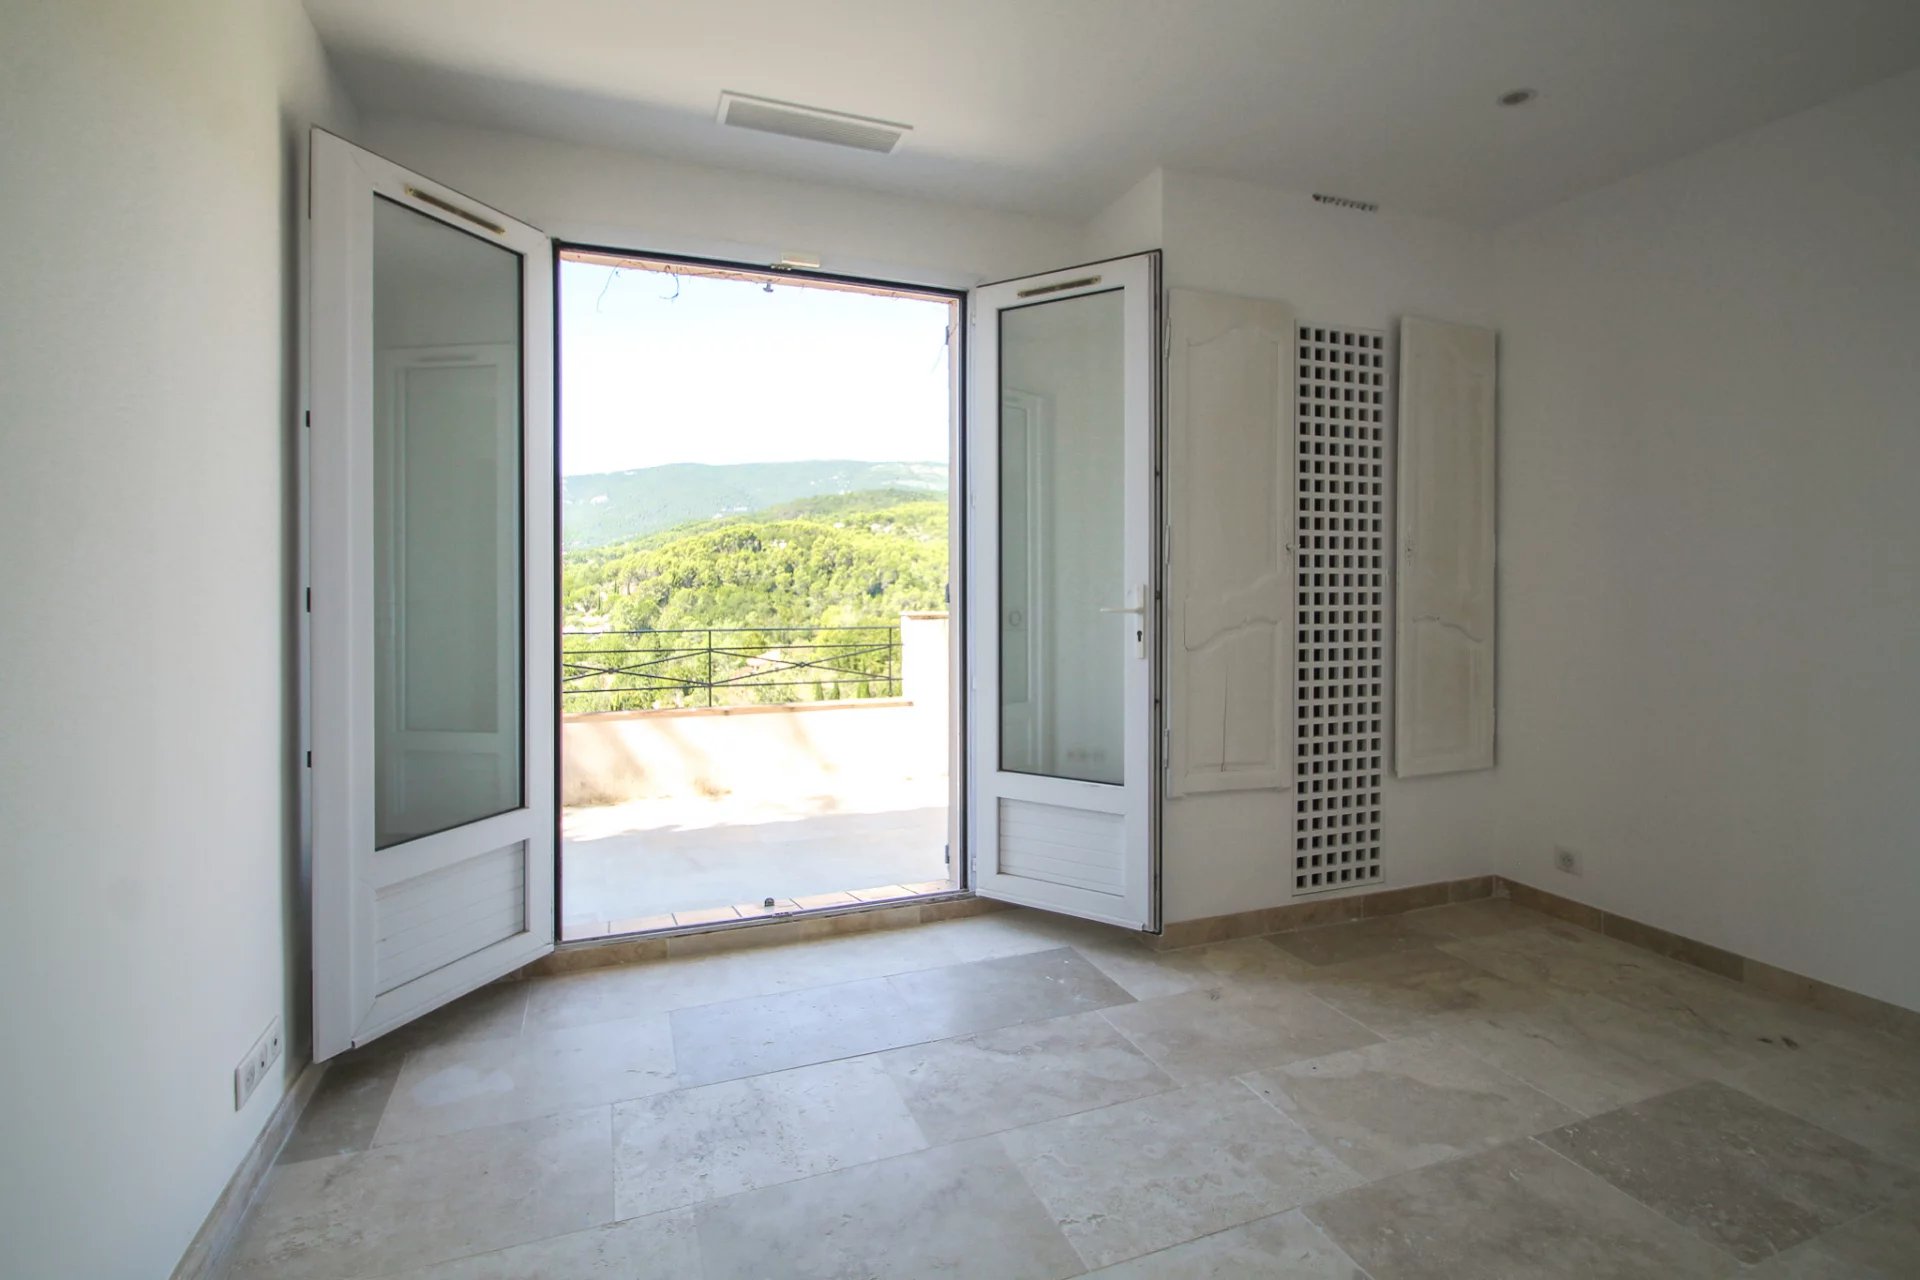 beautiful villa in the picturesque hill side close to Fayence center